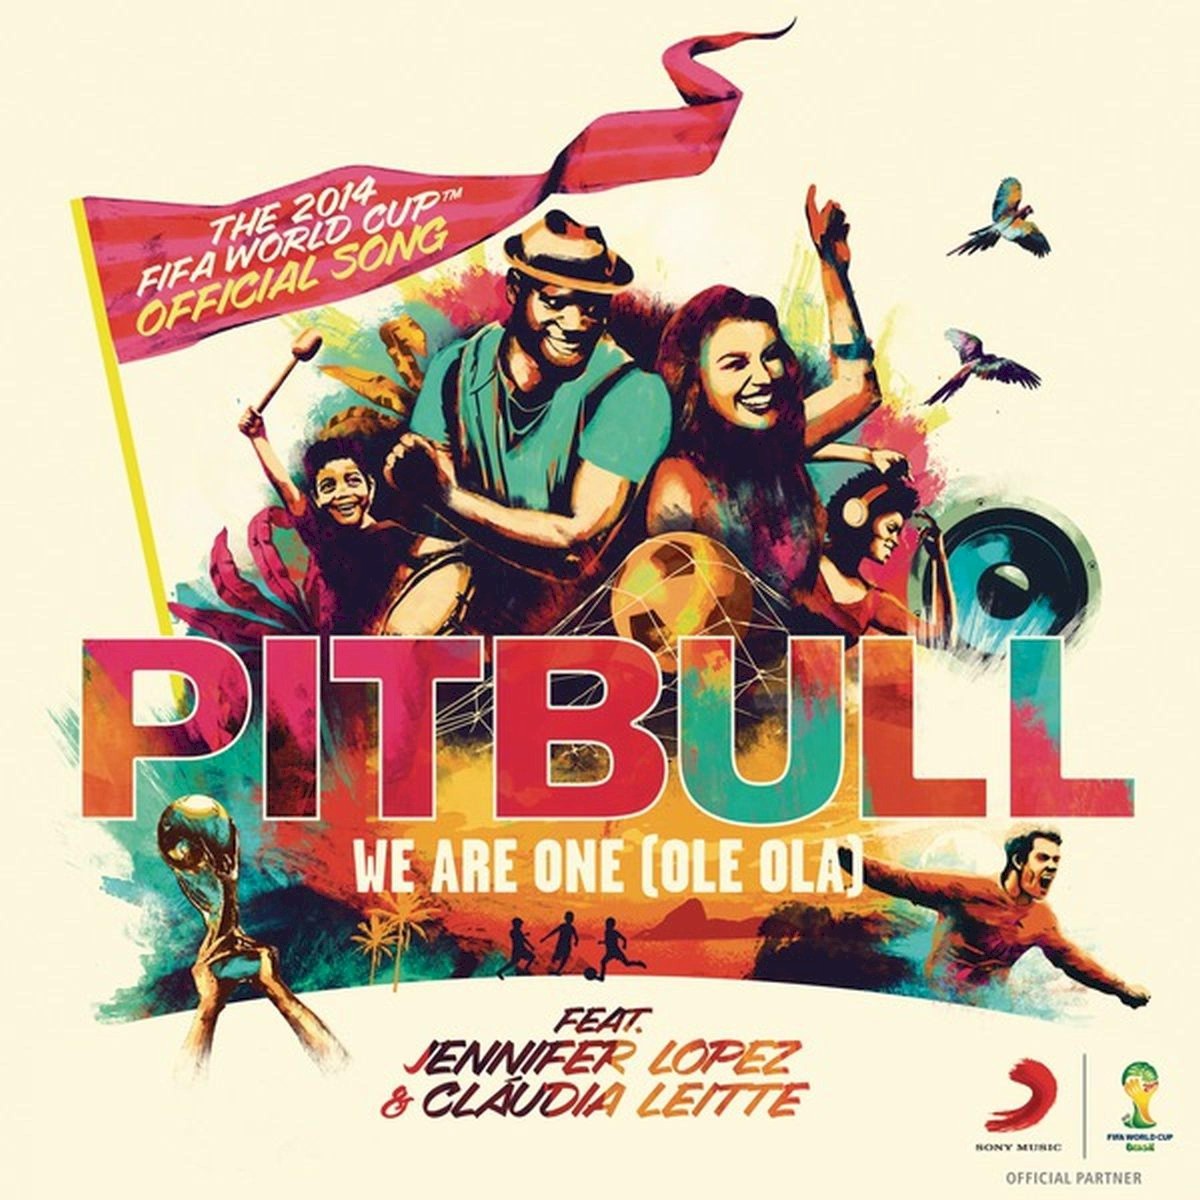 Pitbull ft. featuring Jennifer Lopez & Claudia Leitte We Are One (Ole Ola) [The Official 2014 FIFA World Cup Song] cover artwork